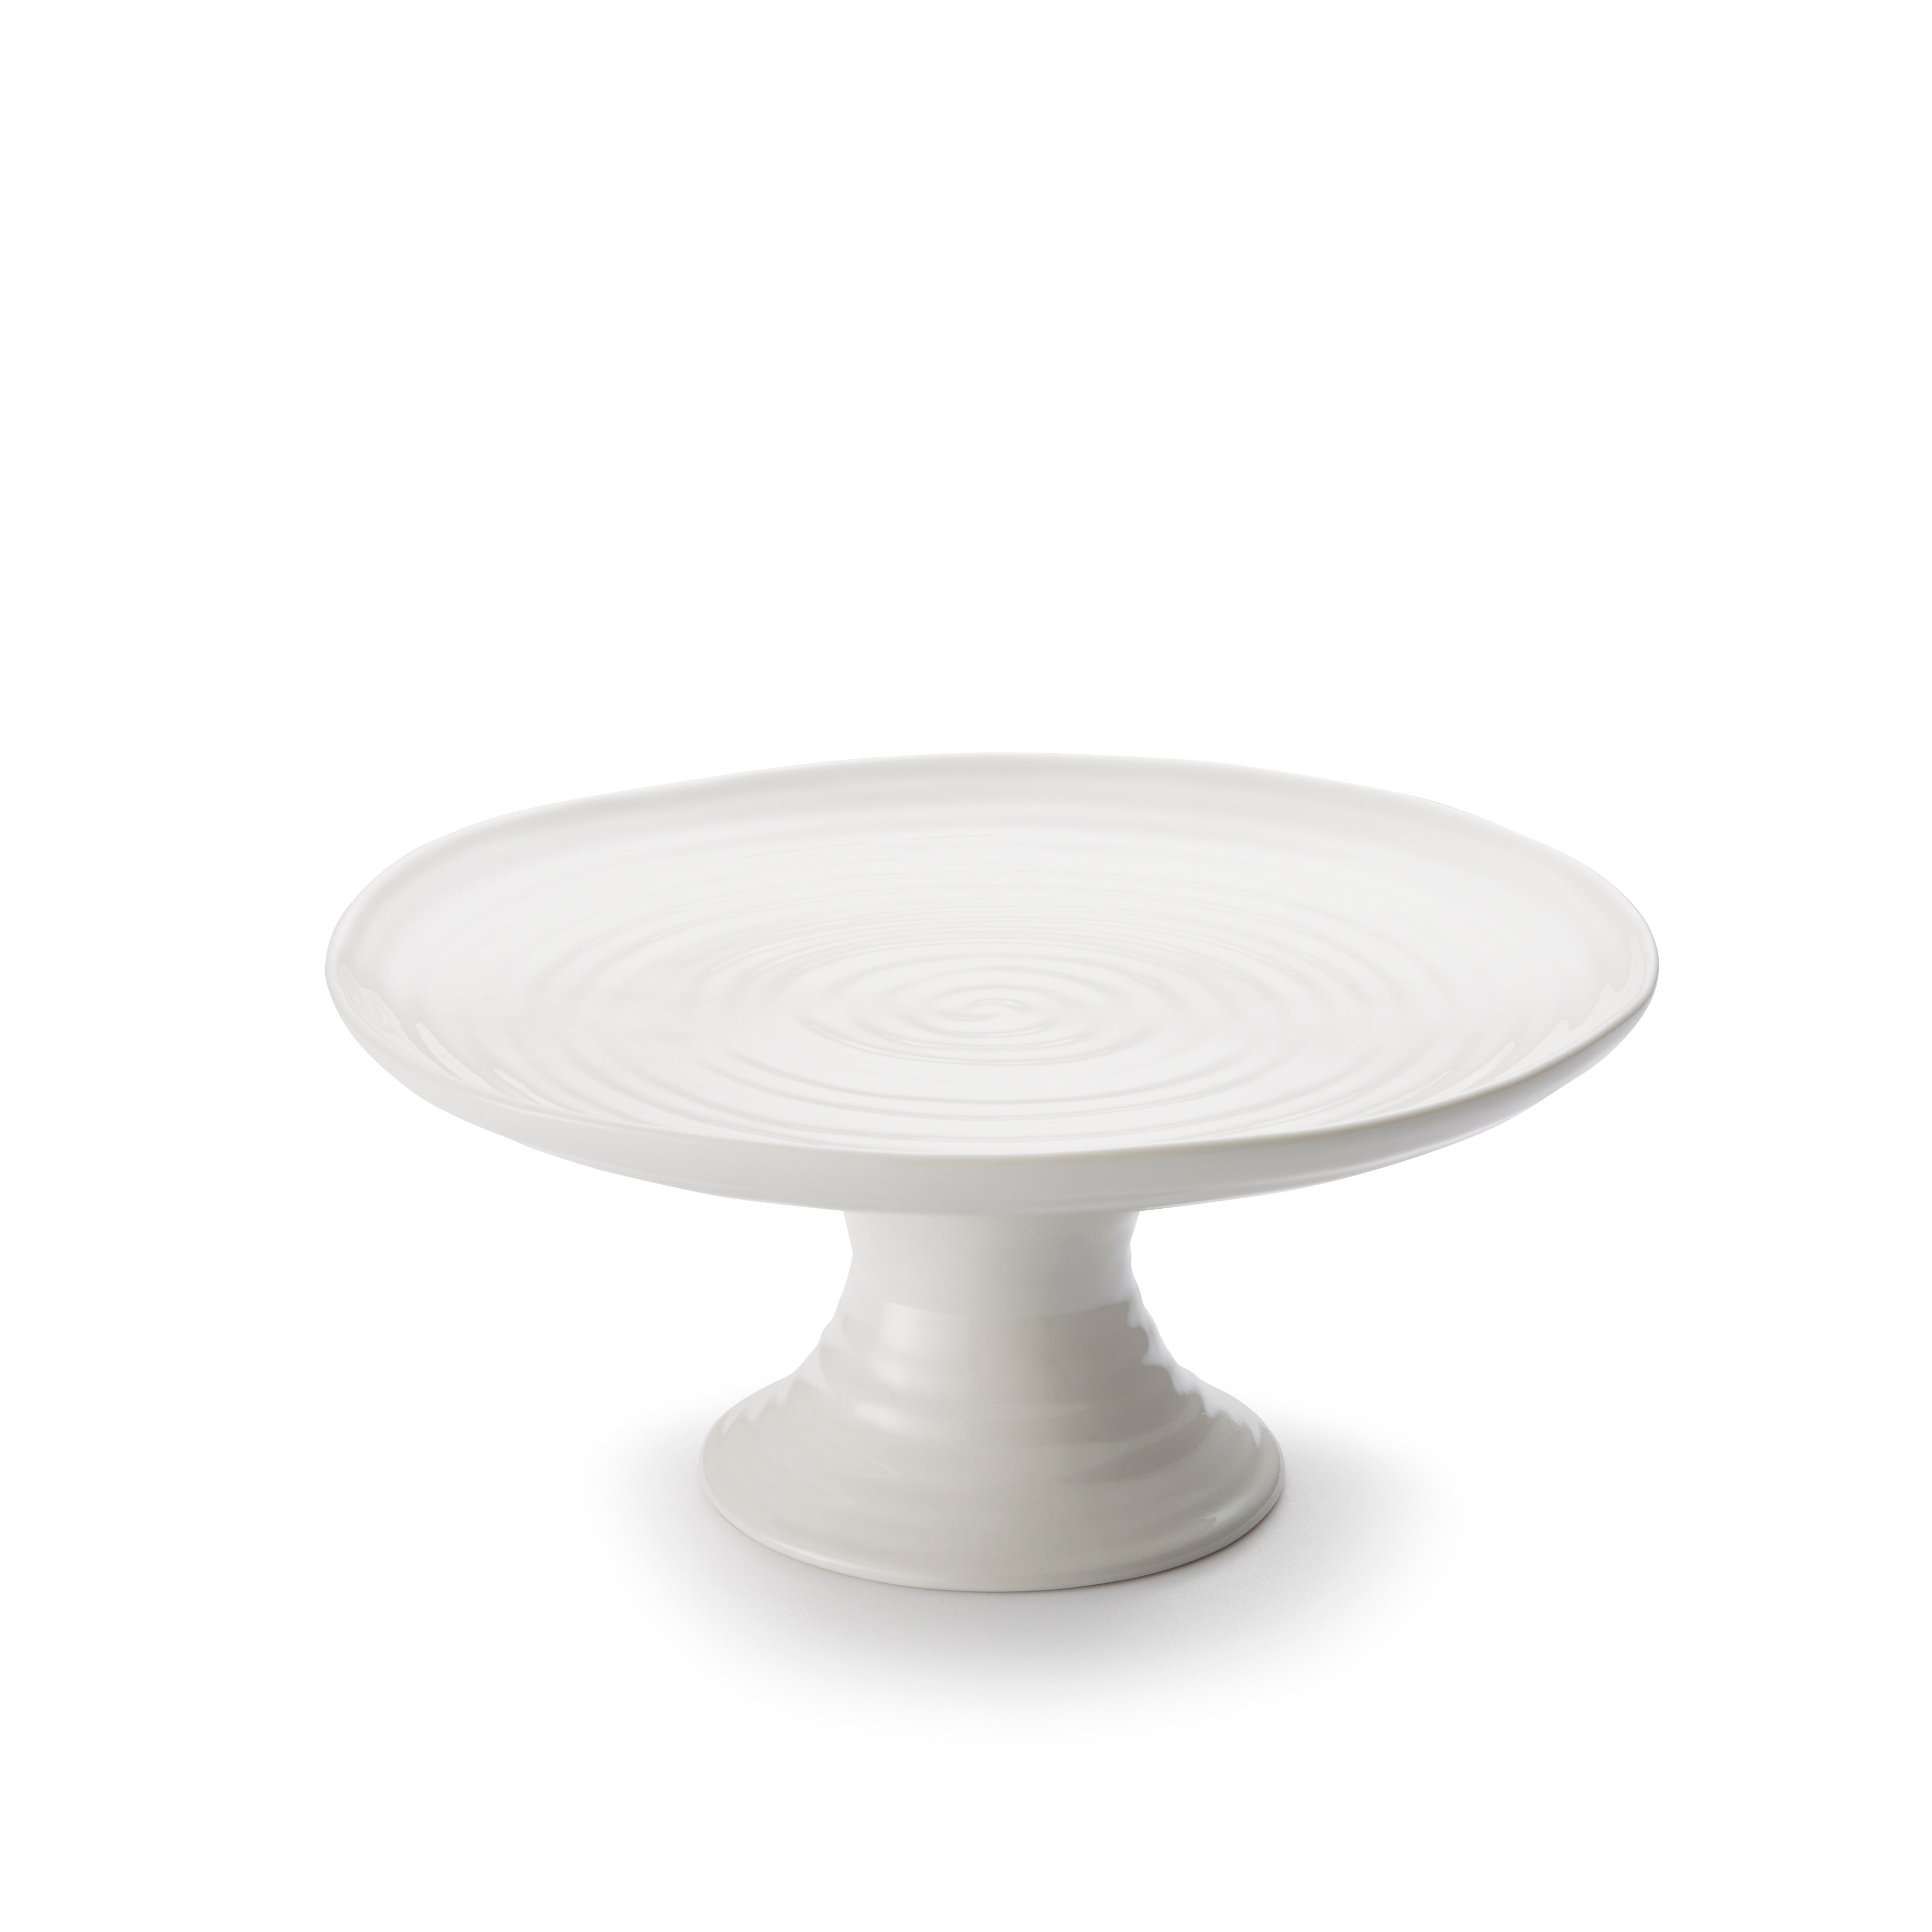 Sophie Conran for Portmeirion Small Footed Cake Plate